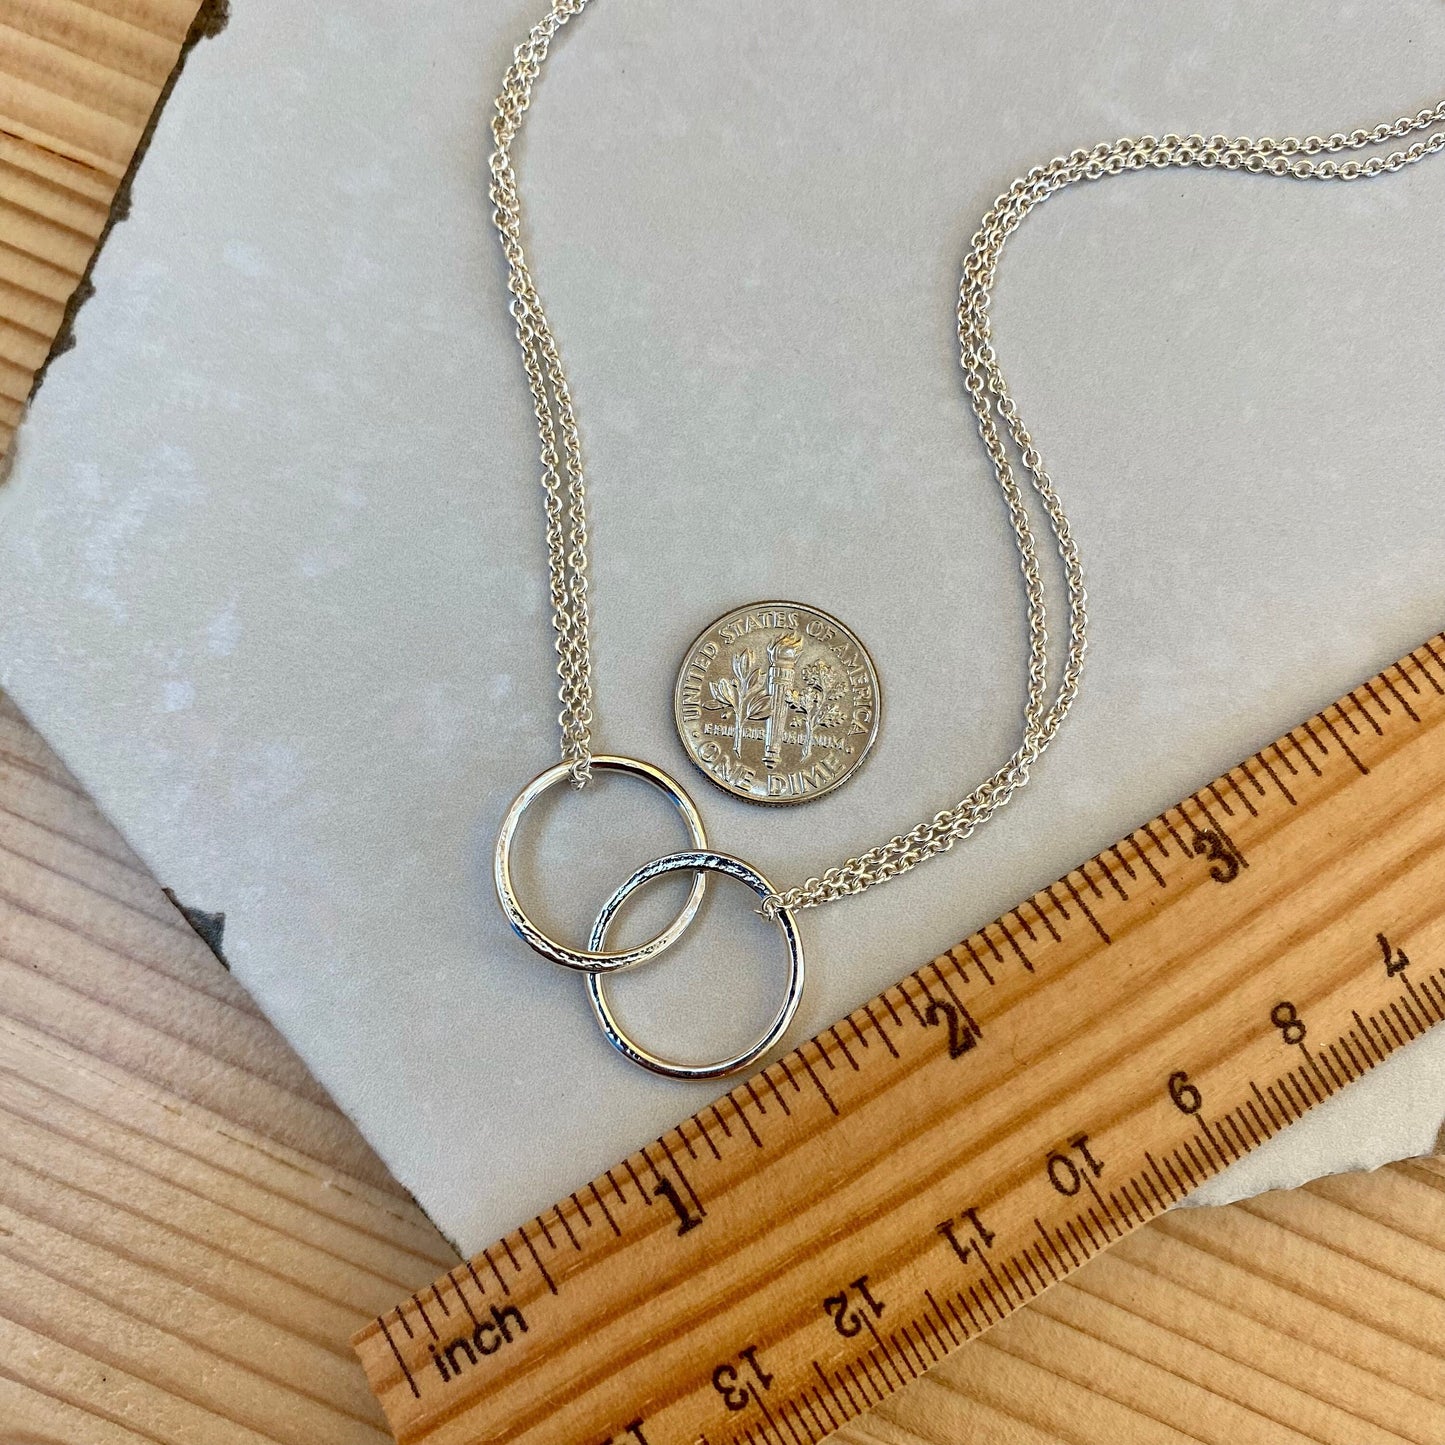 Interlocking Circle Necklace, Equally Sized Sterling Silver Infinity Necklace, 2 Connected Hammered Rings, Best Friend or Anniversary Gift